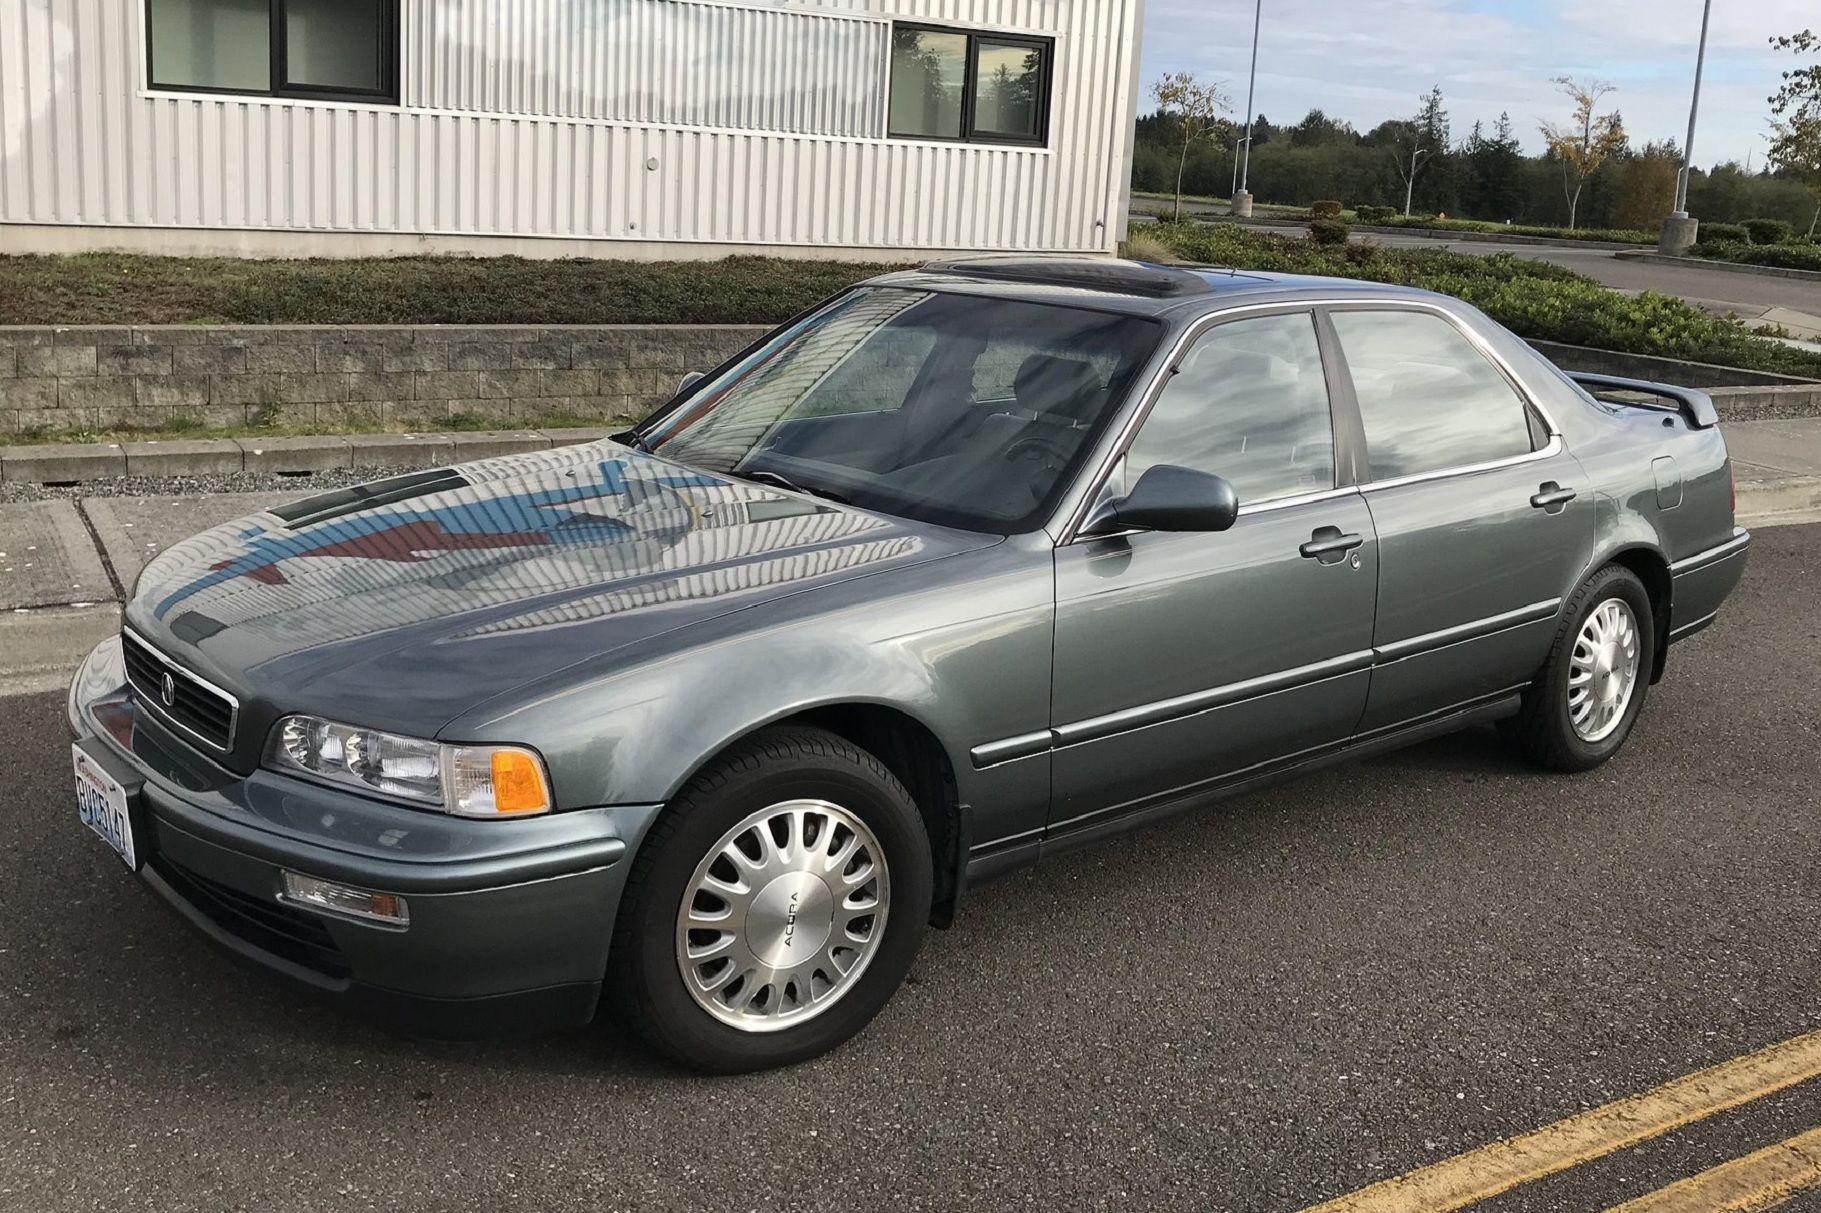 Acura Legend parked on the road